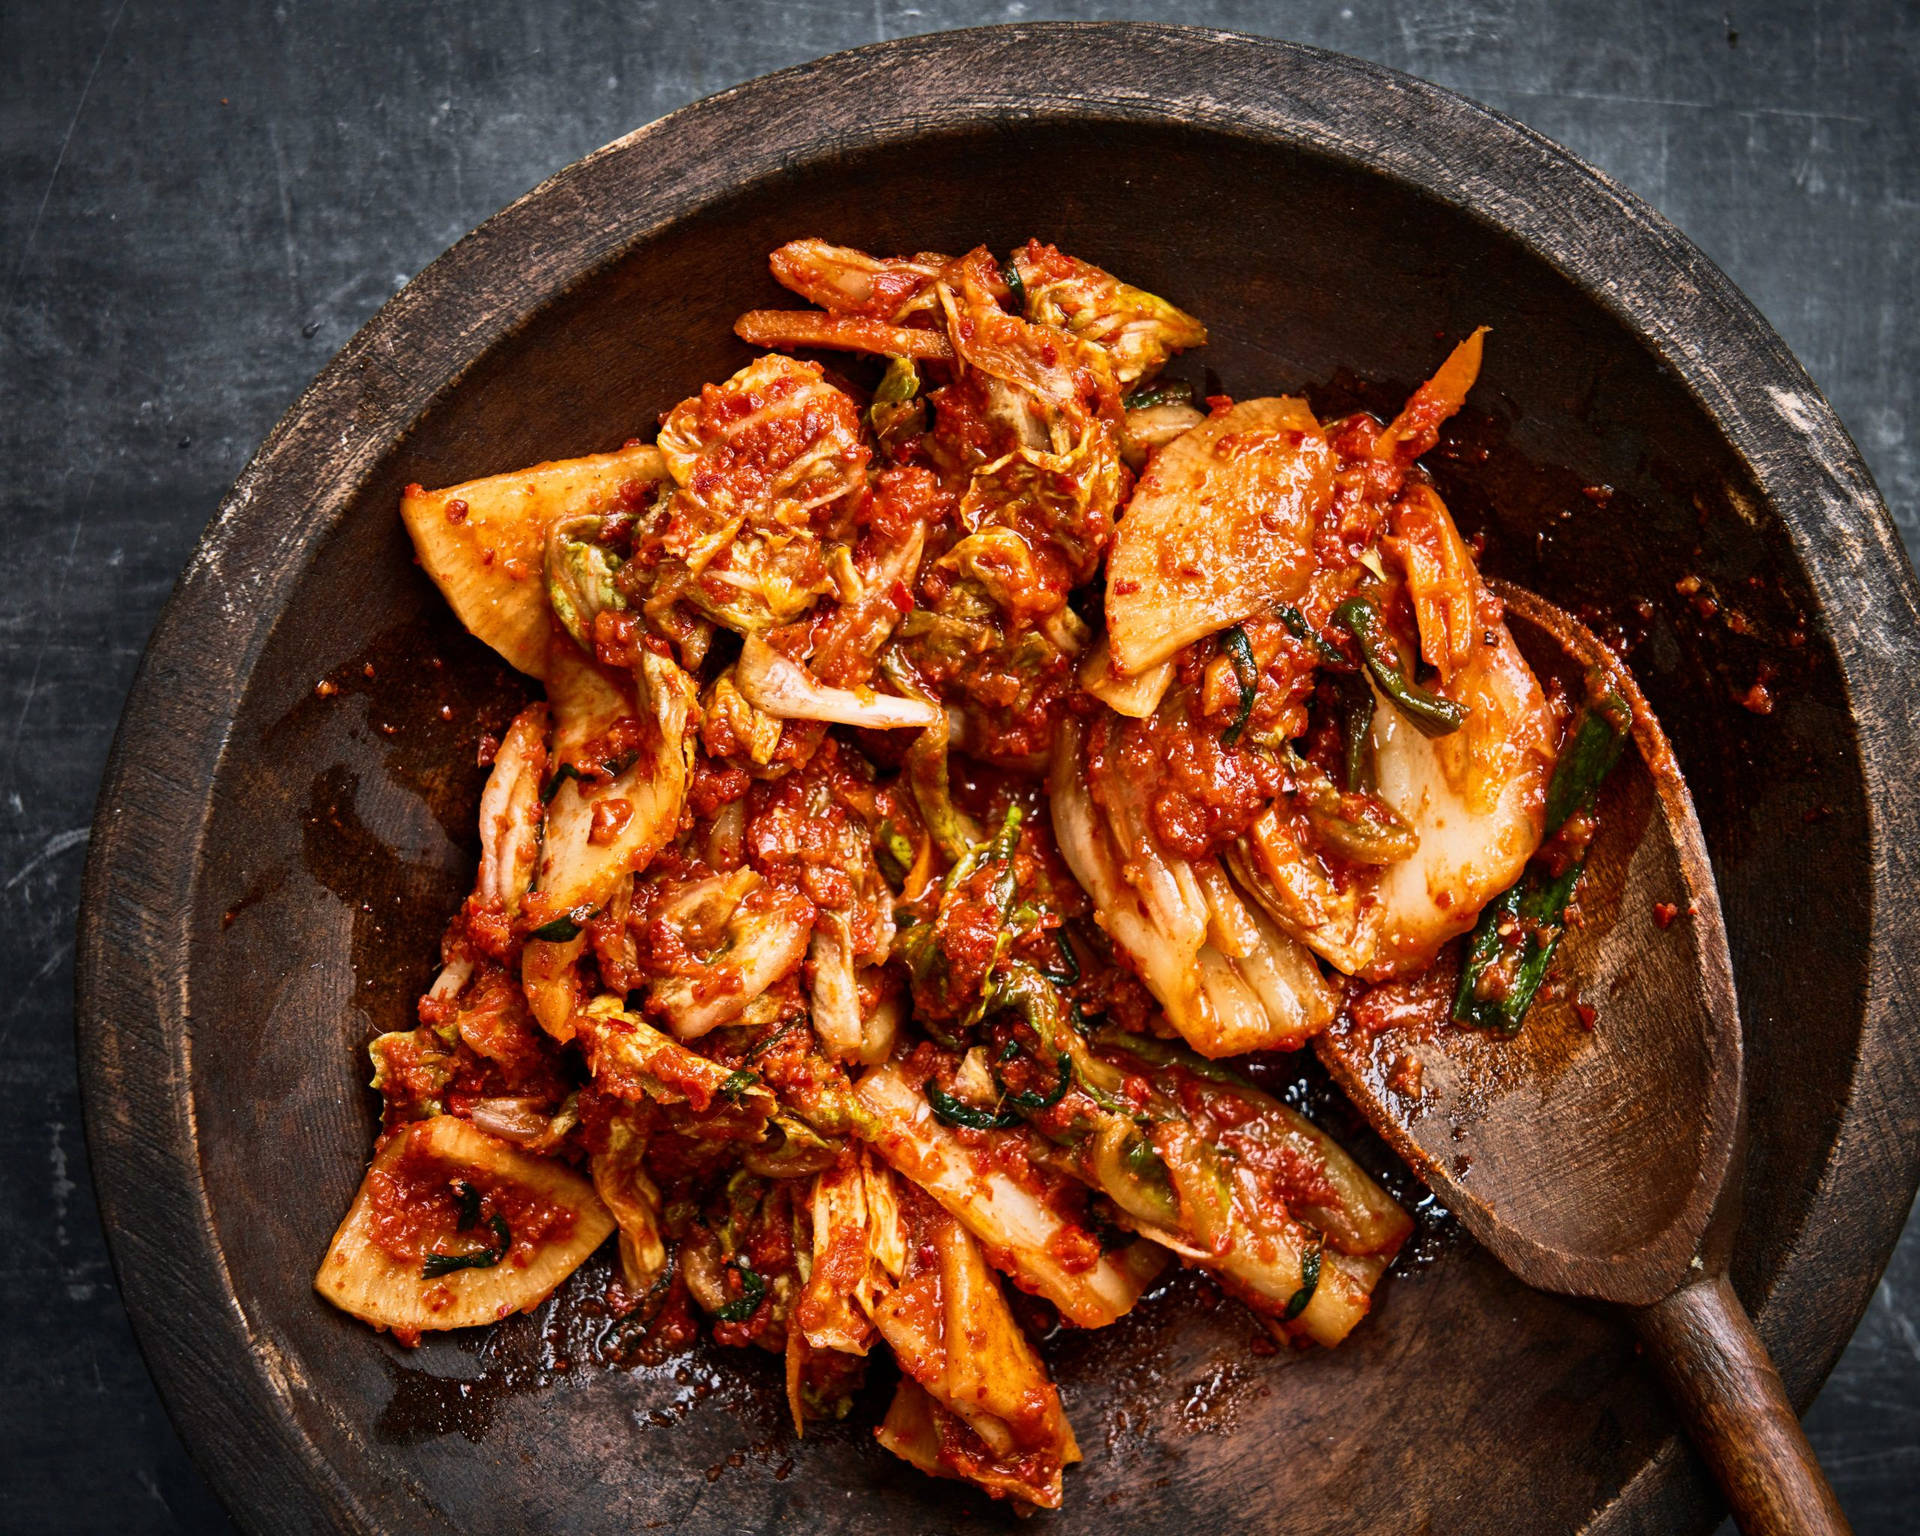 Kimchi Kimchi Background, Cooking Kimchi, Kimchi Picture Background Image  And Wallpaper for Free Download